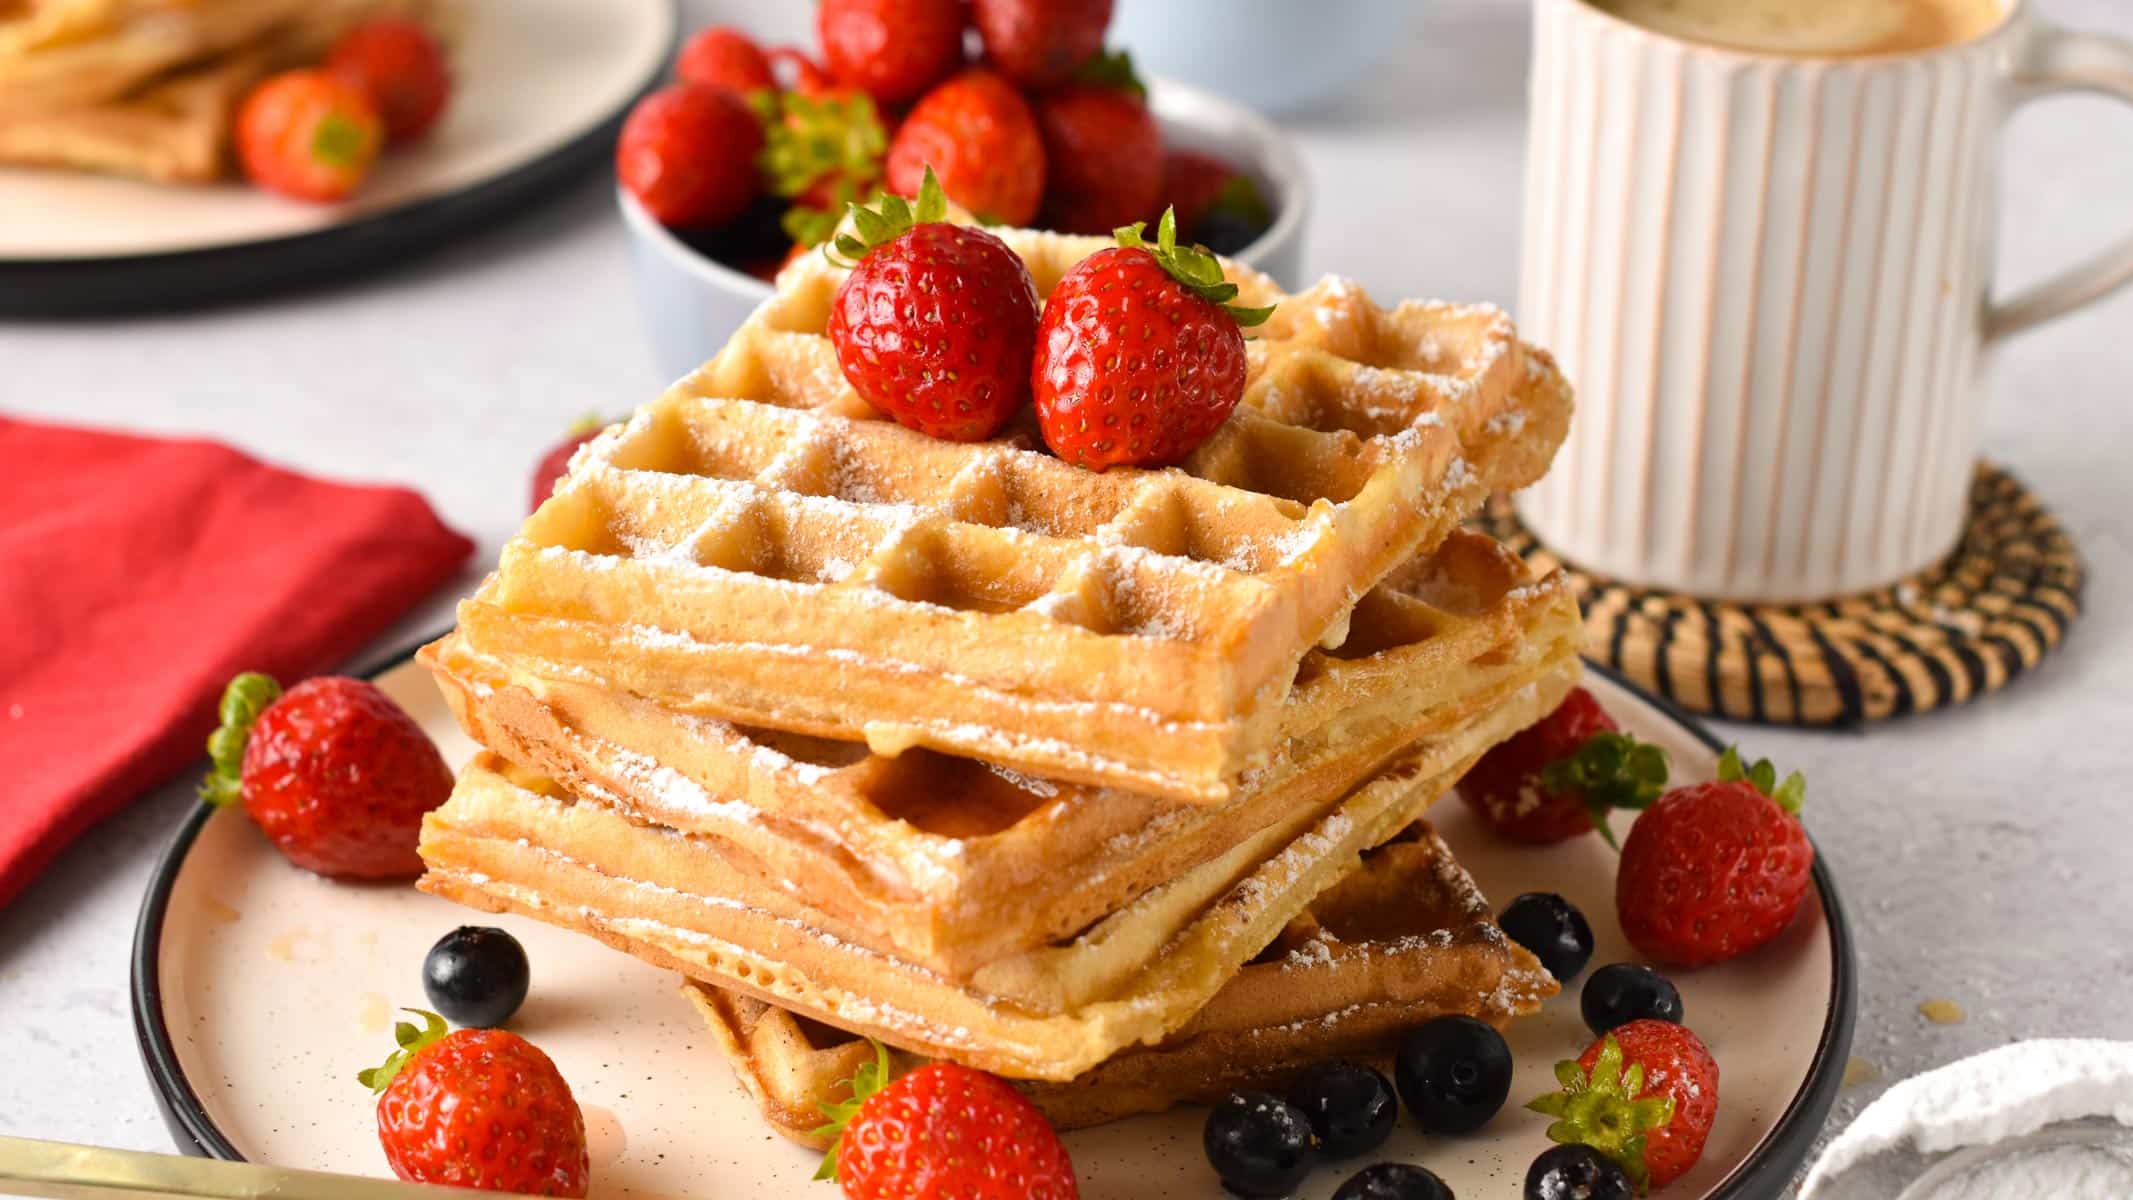 These Vegan Waffle Recipe are light, fluffy and crispy vegan Belgian waffles perfect as a week-end comforting breakfast.